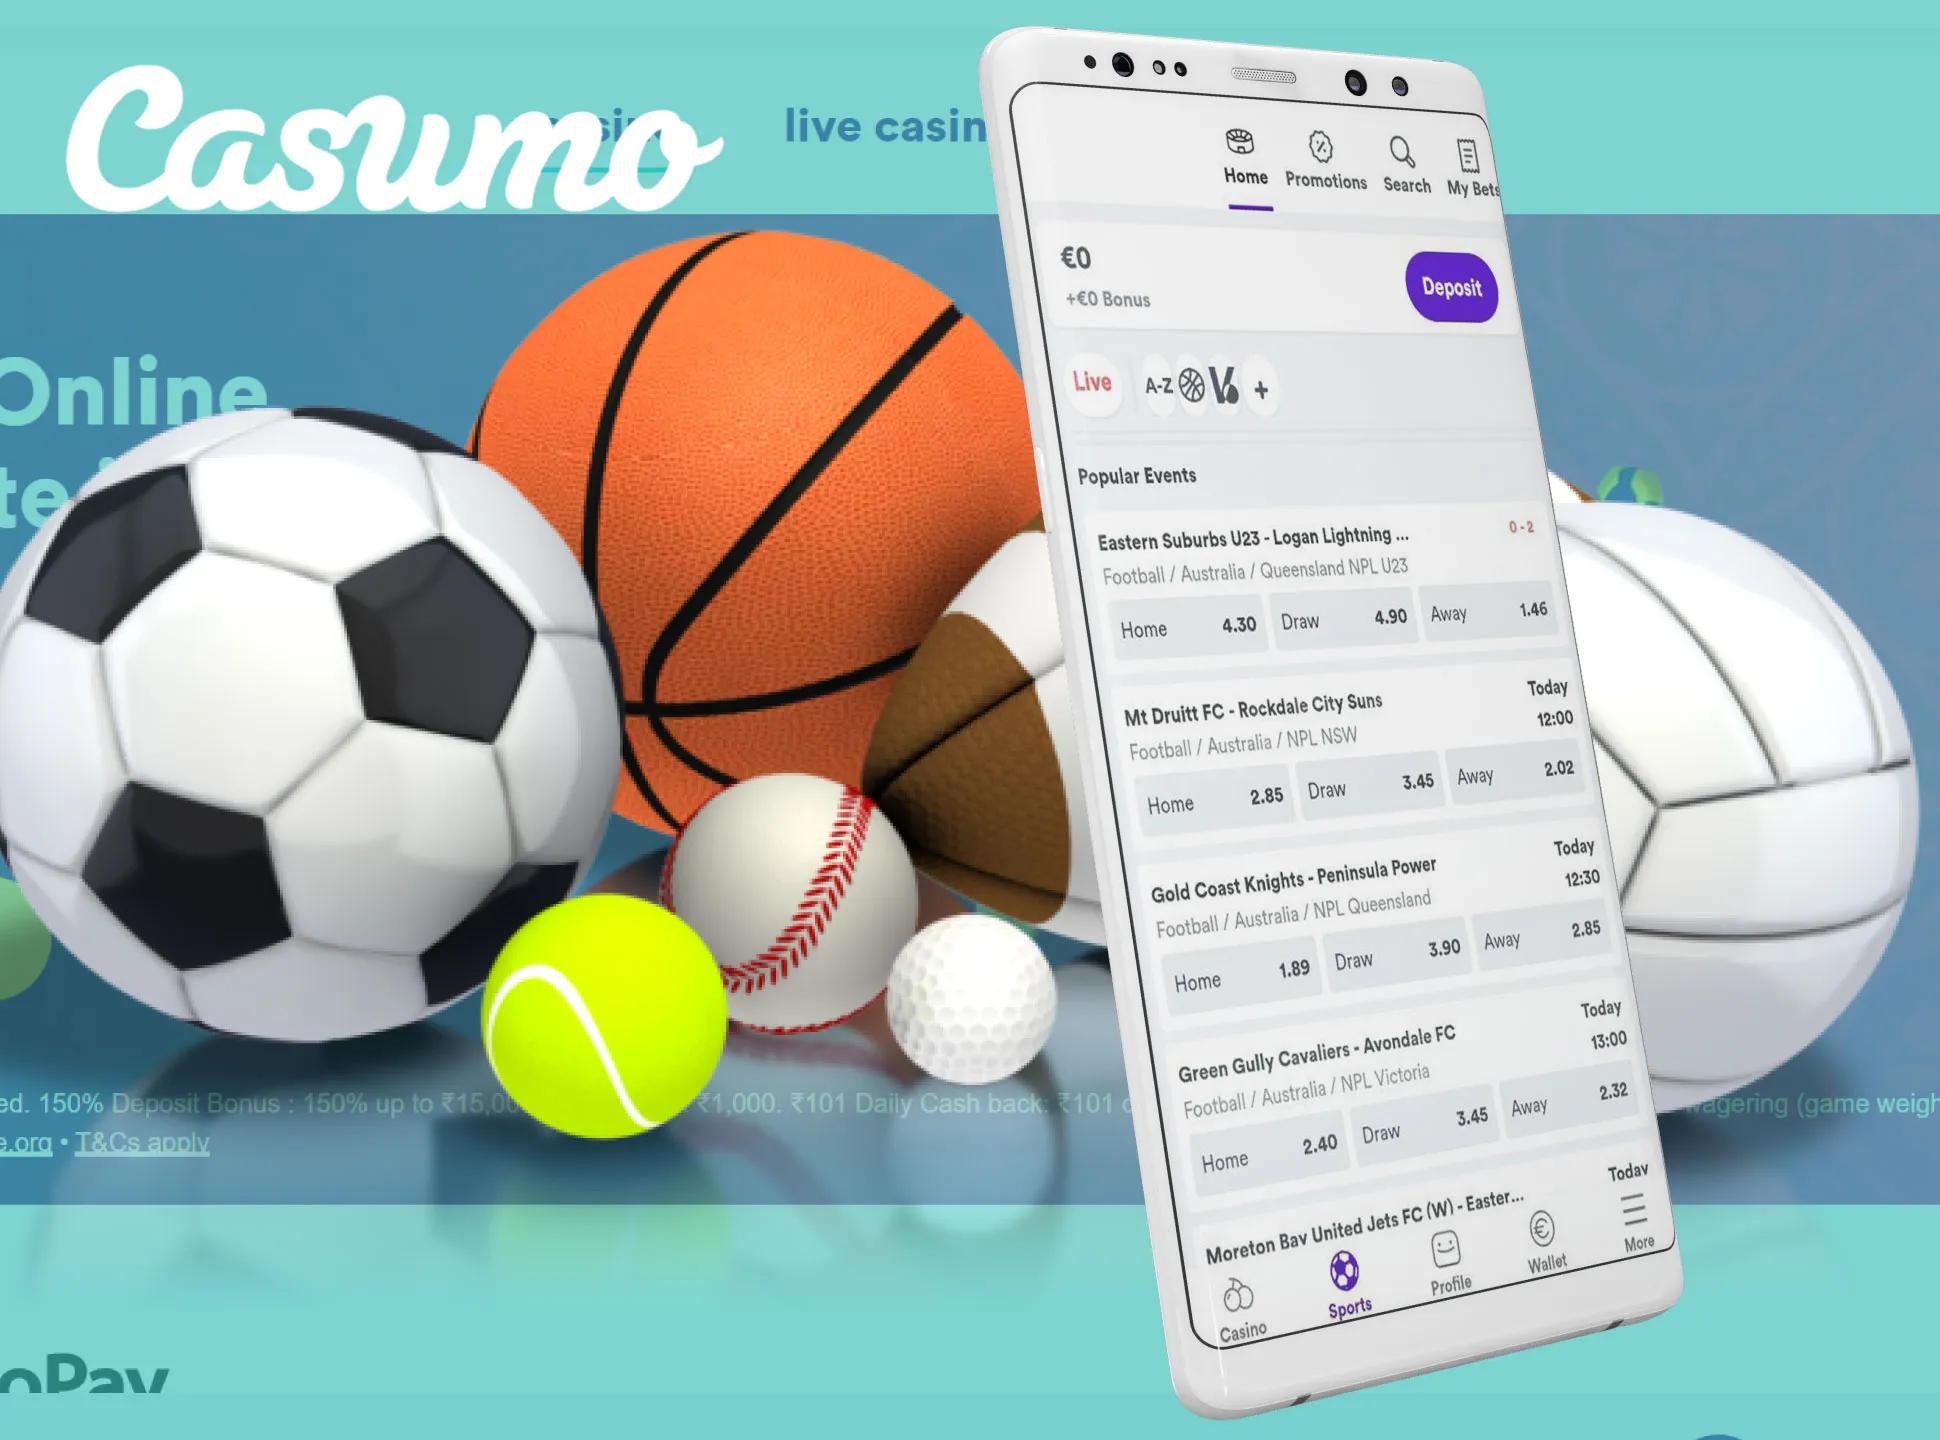 You will find various sports event to bet on in the Casumo mobile app.